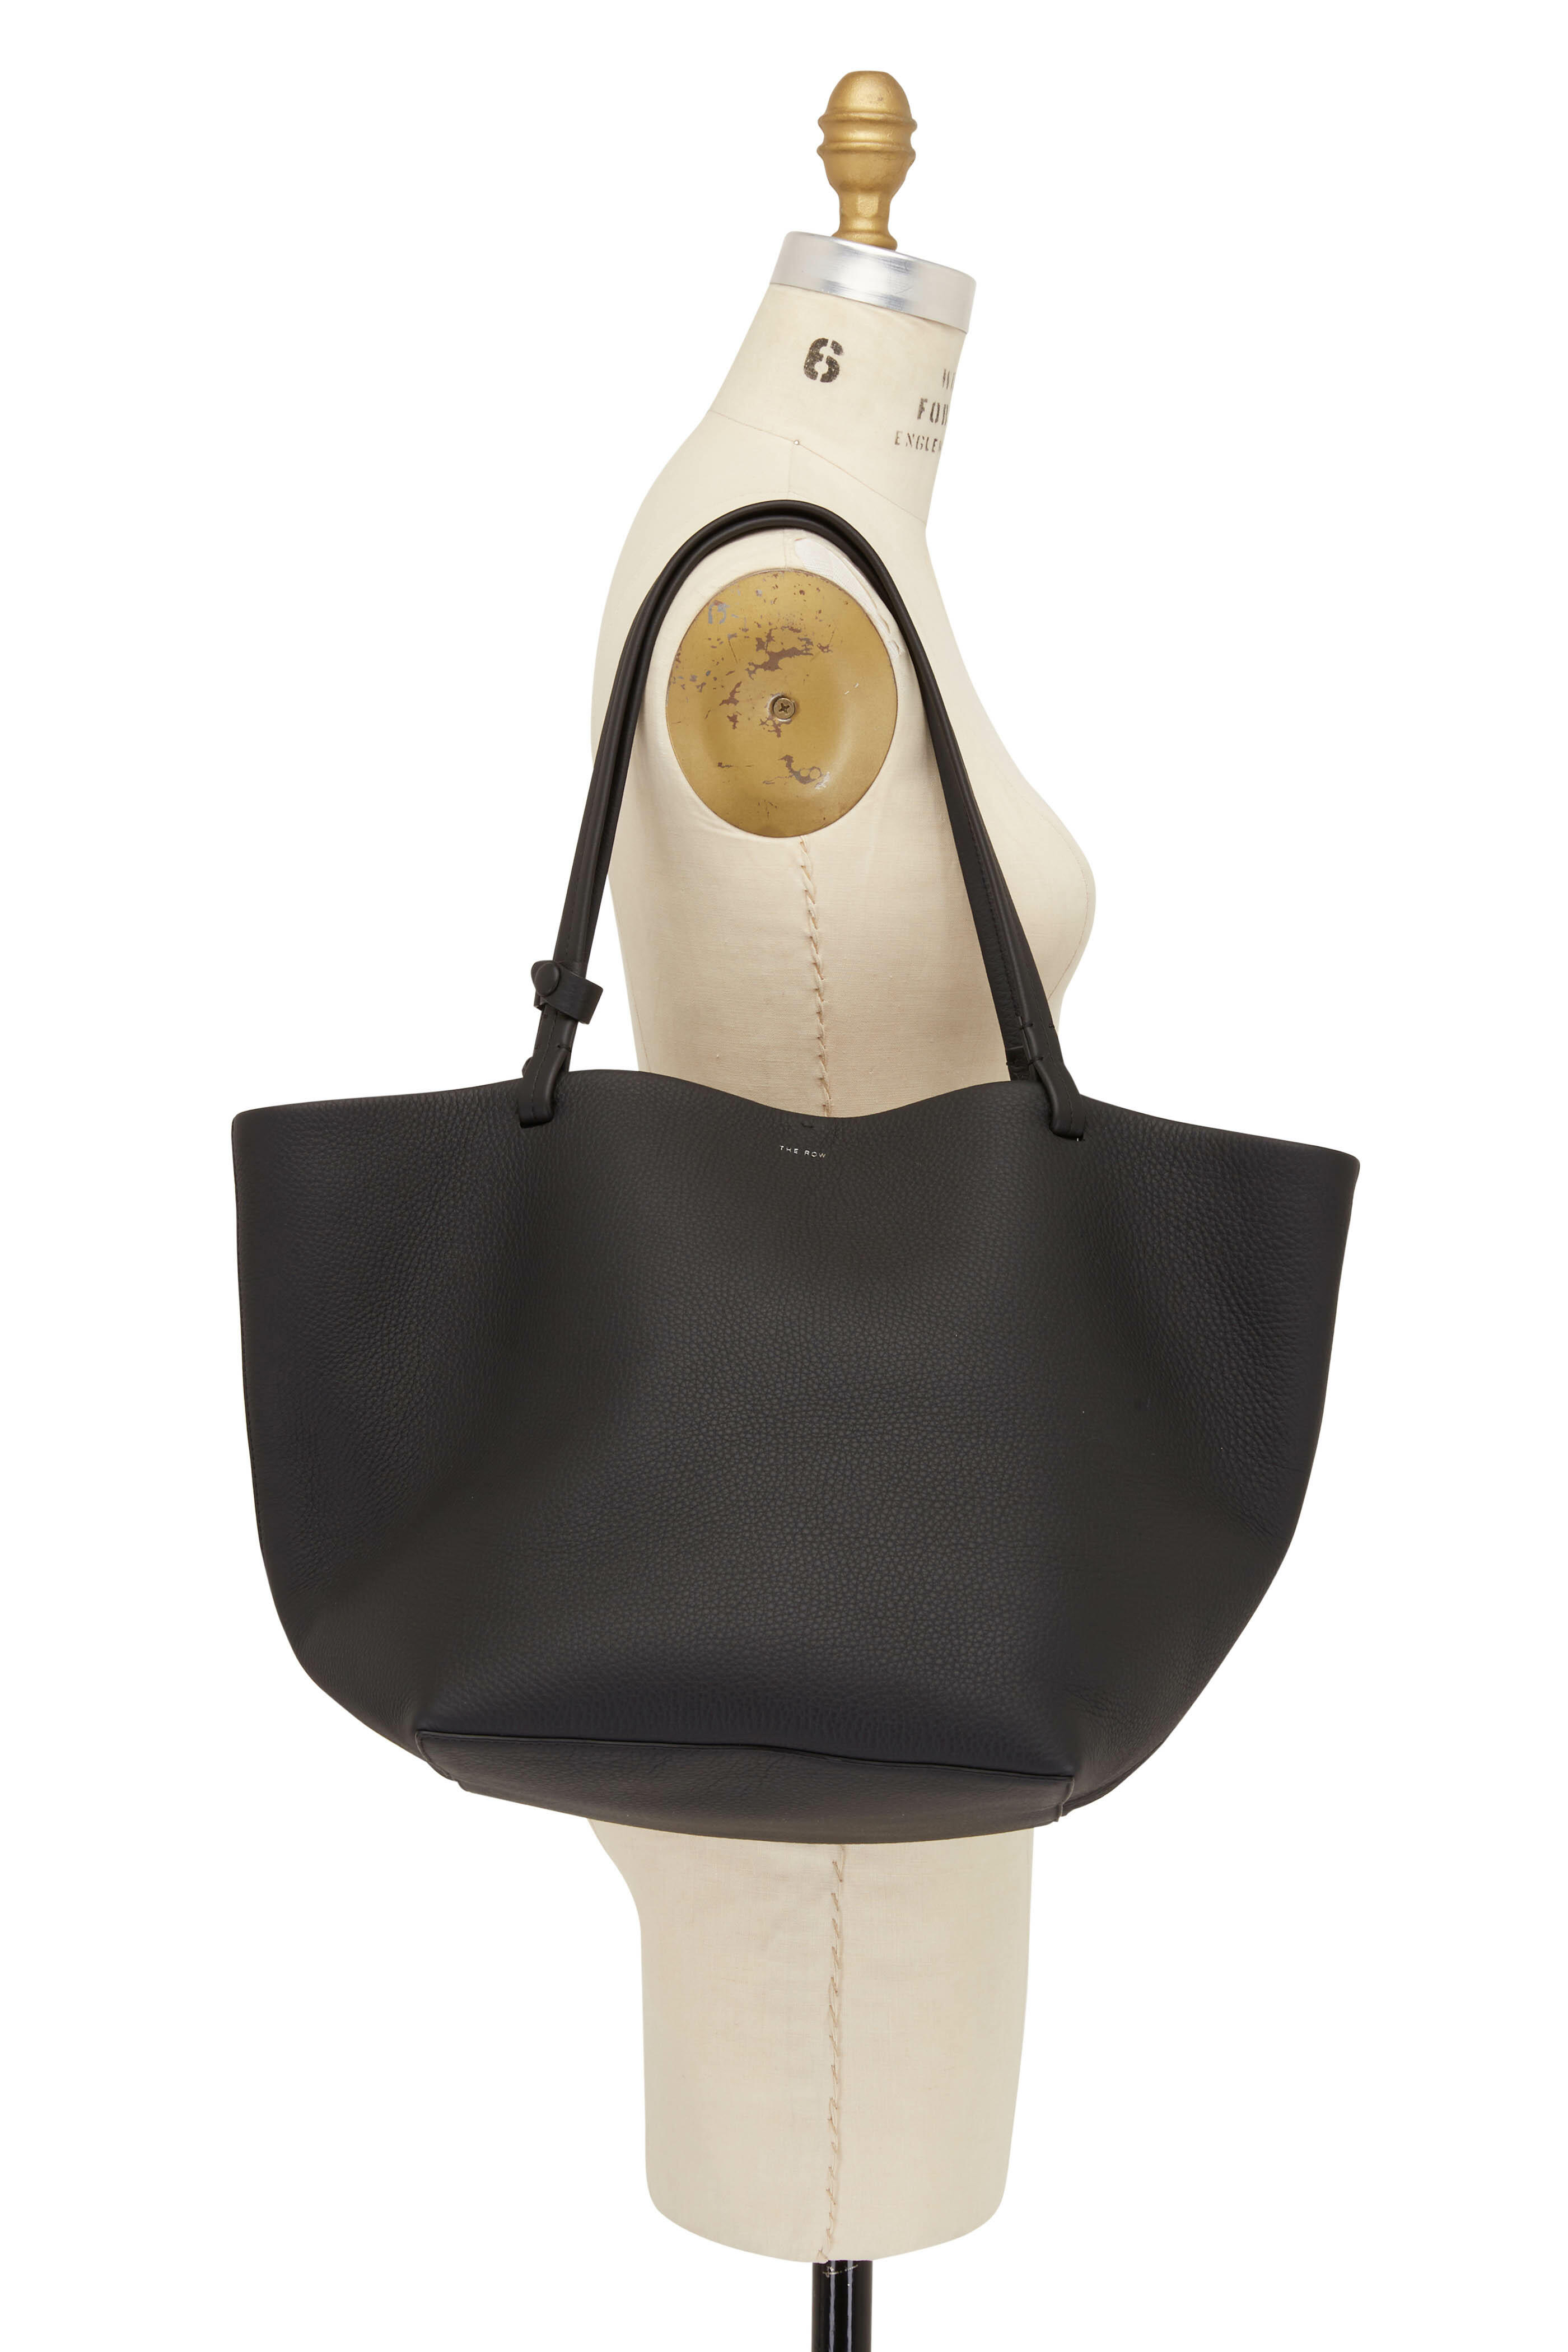 Shop The Row The Row Park Tote Casual Style Plain Leather Office